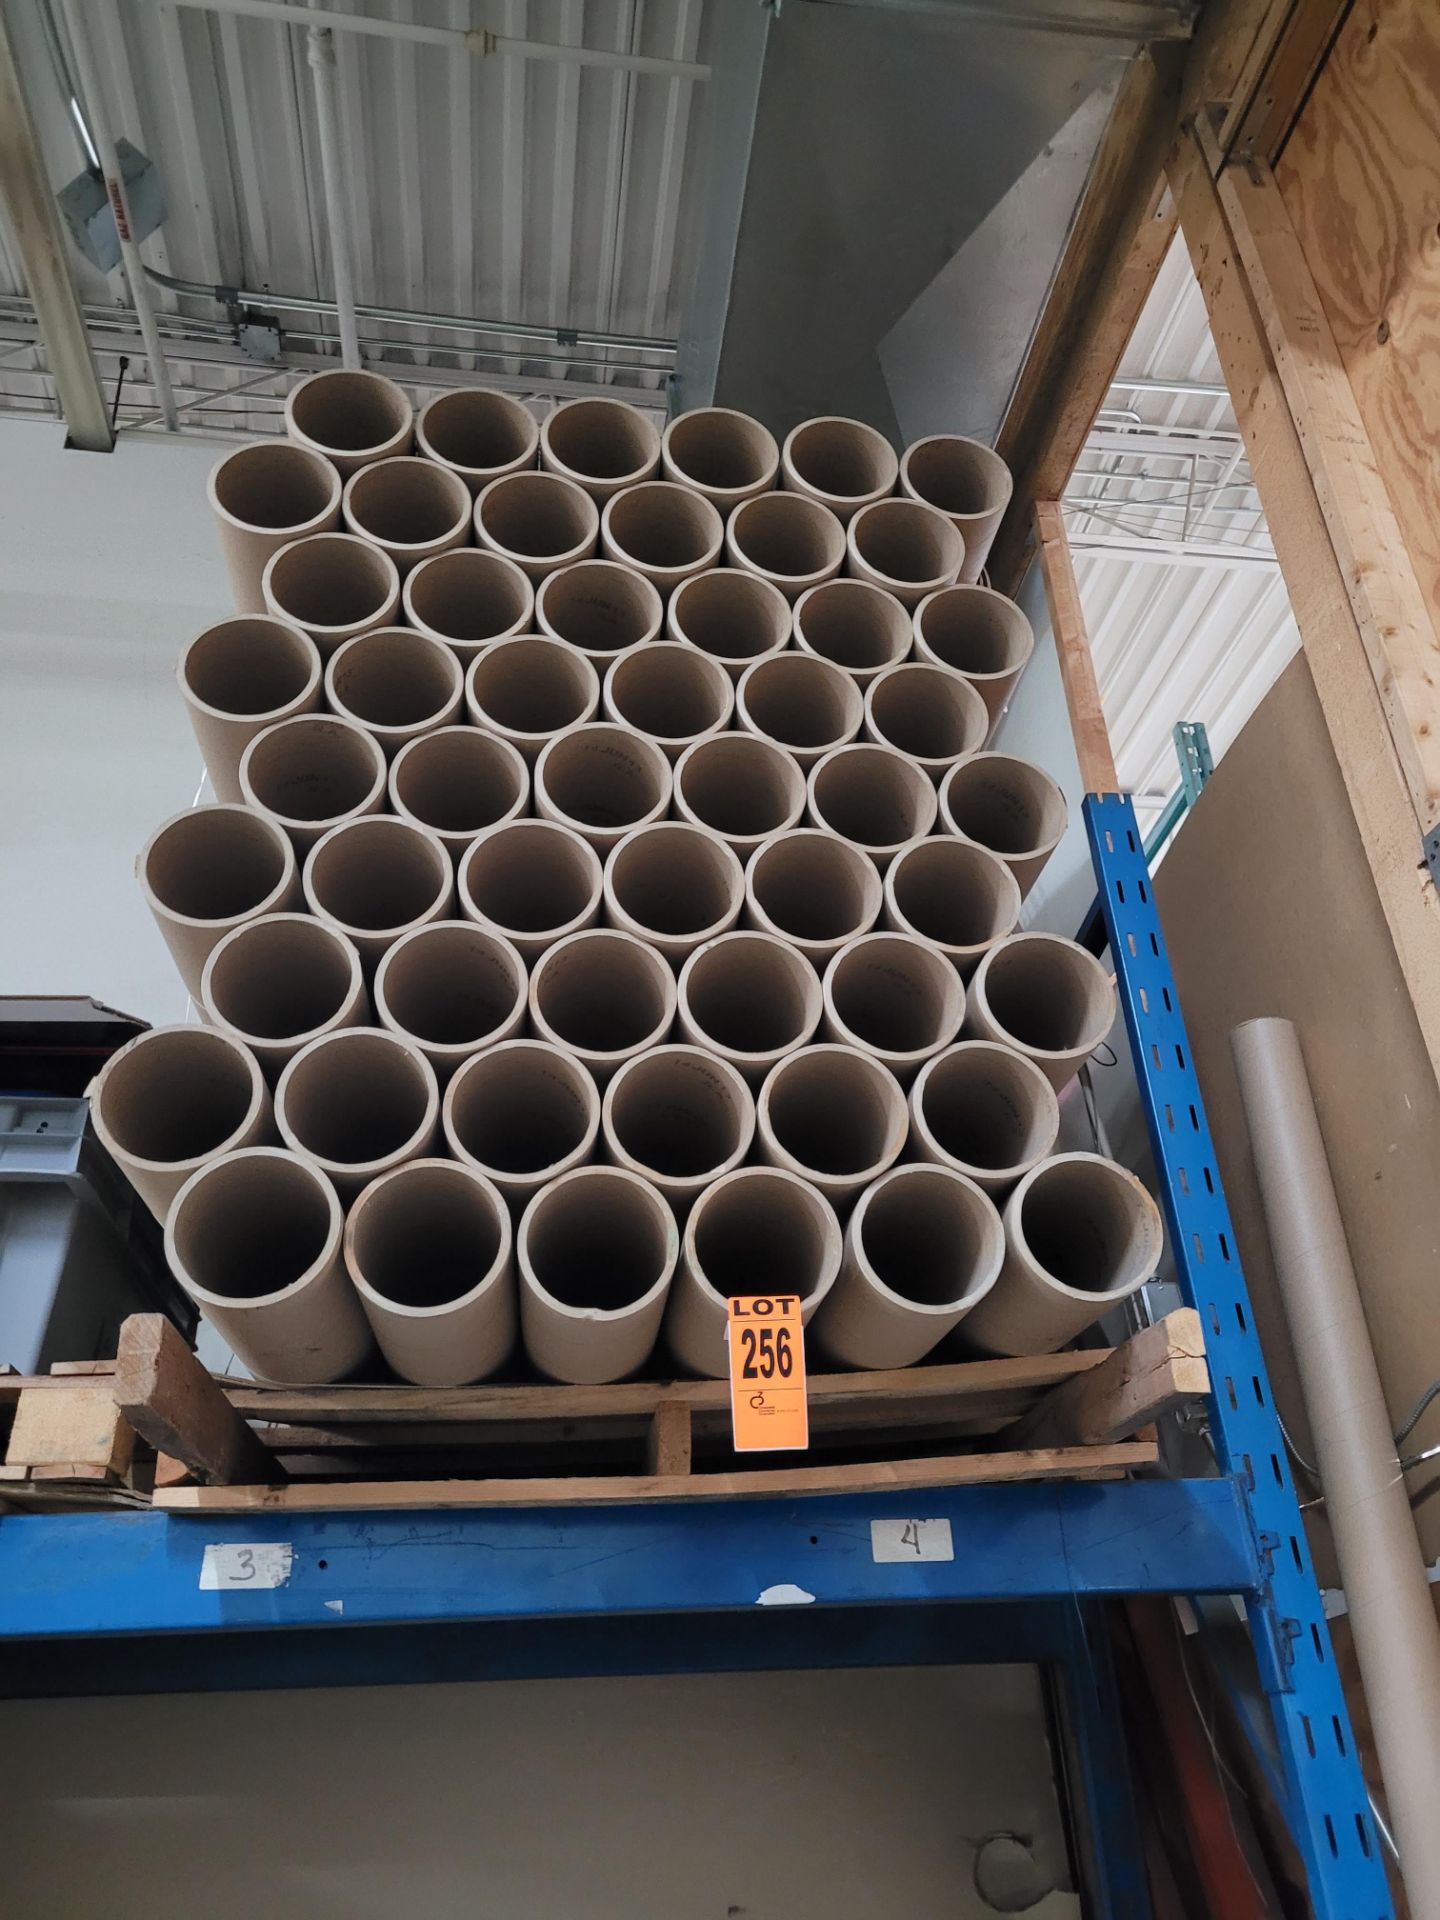 Lot of (54) Cardboard Cylinders, on pallet